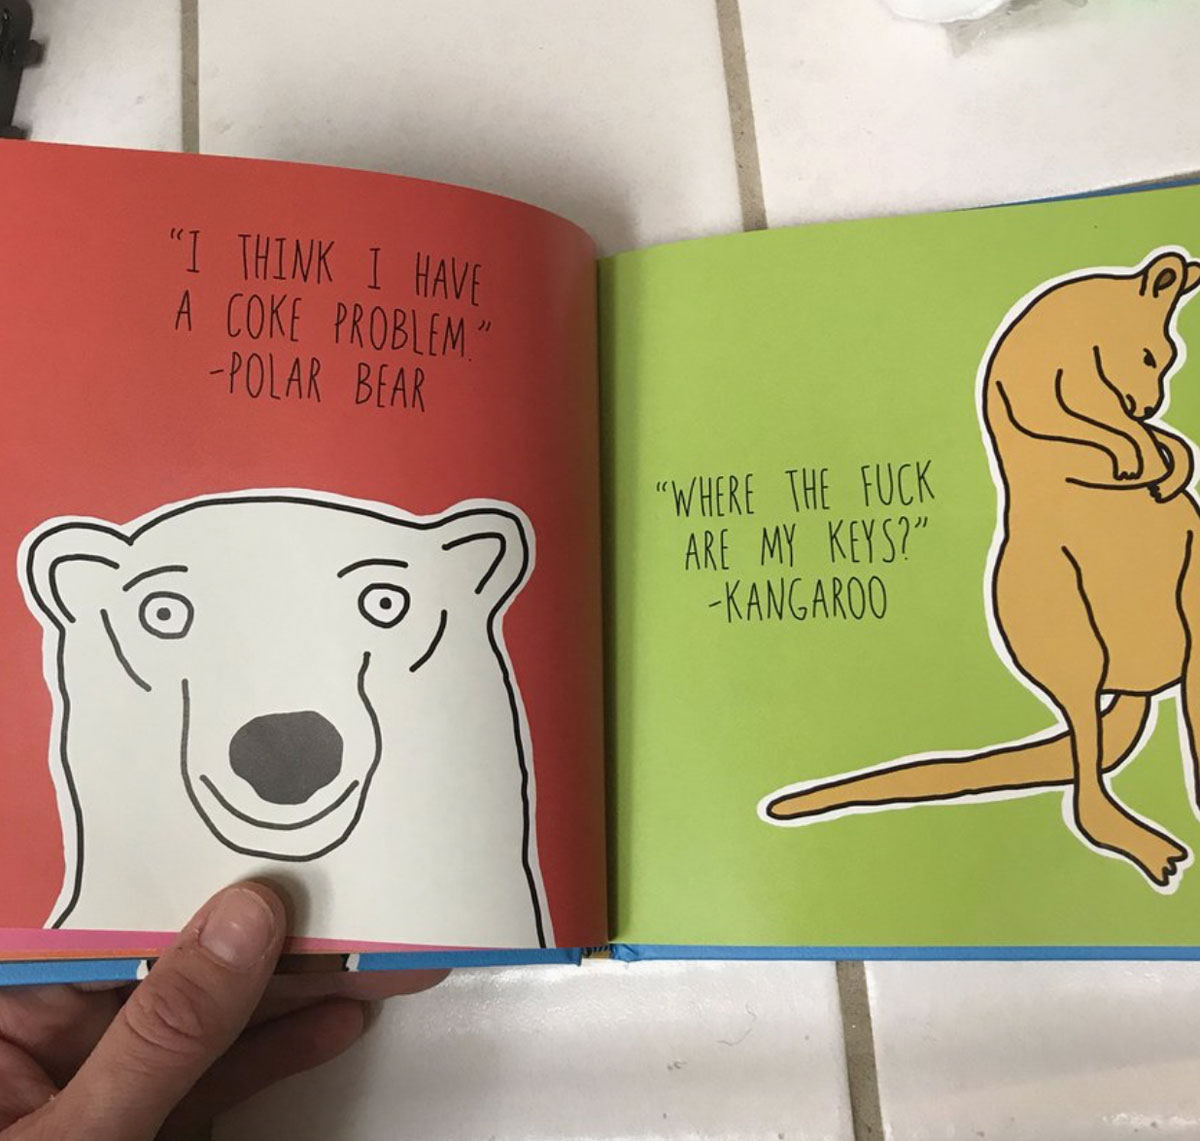 A grandma gifted this book to her 6-year-old grandson thinking it was a children's book